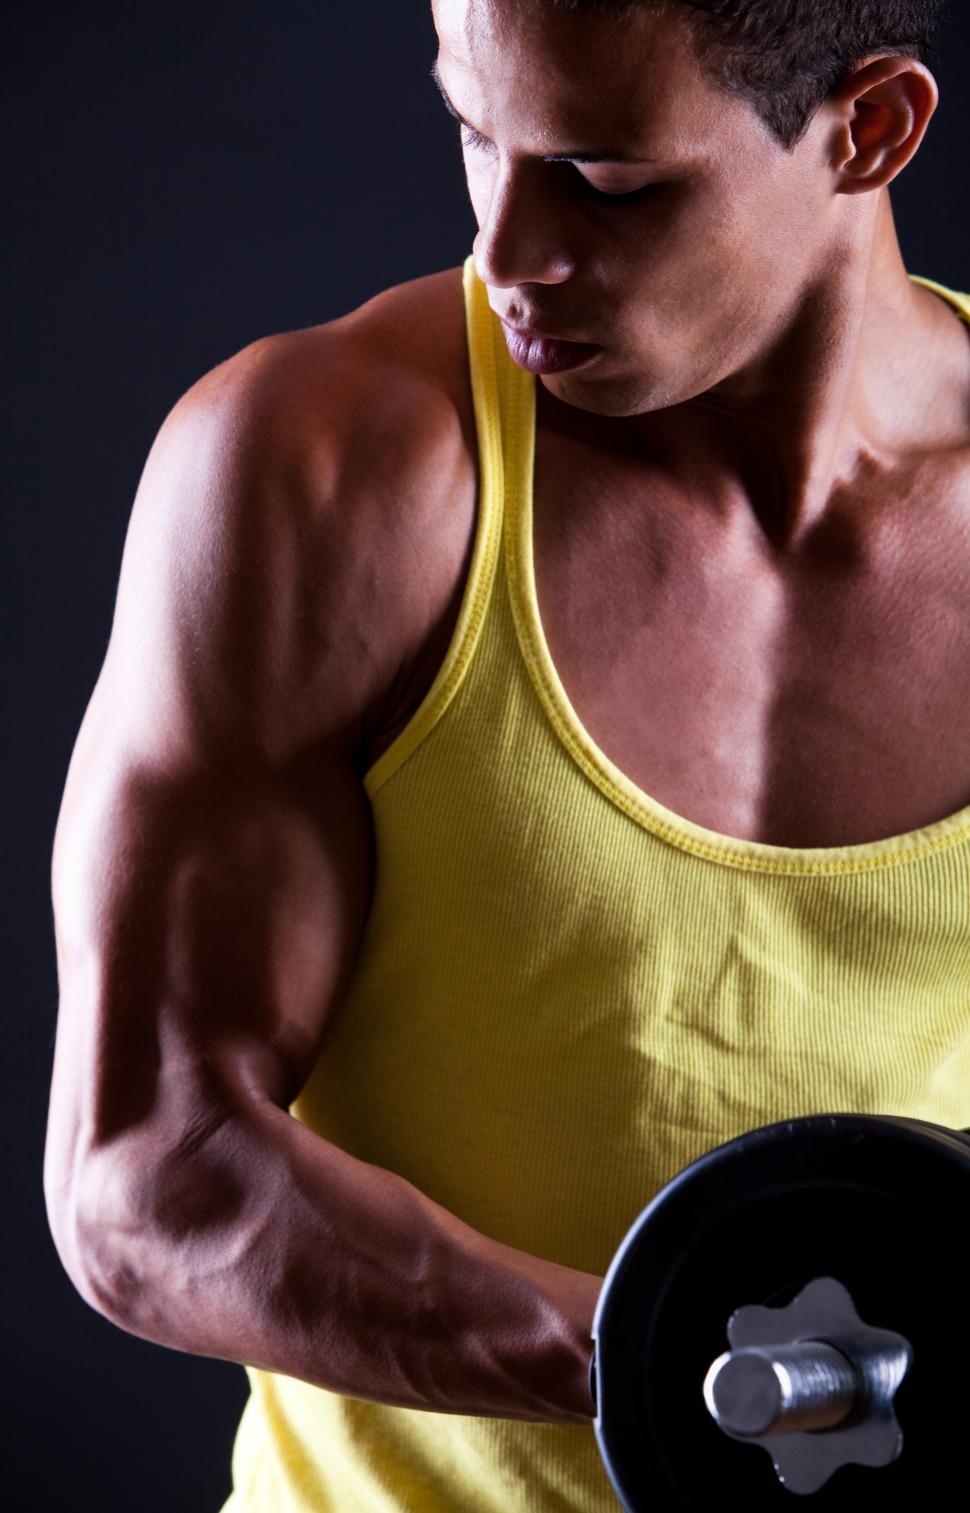 Free Image of Strong and muscular guy with dumbbell 